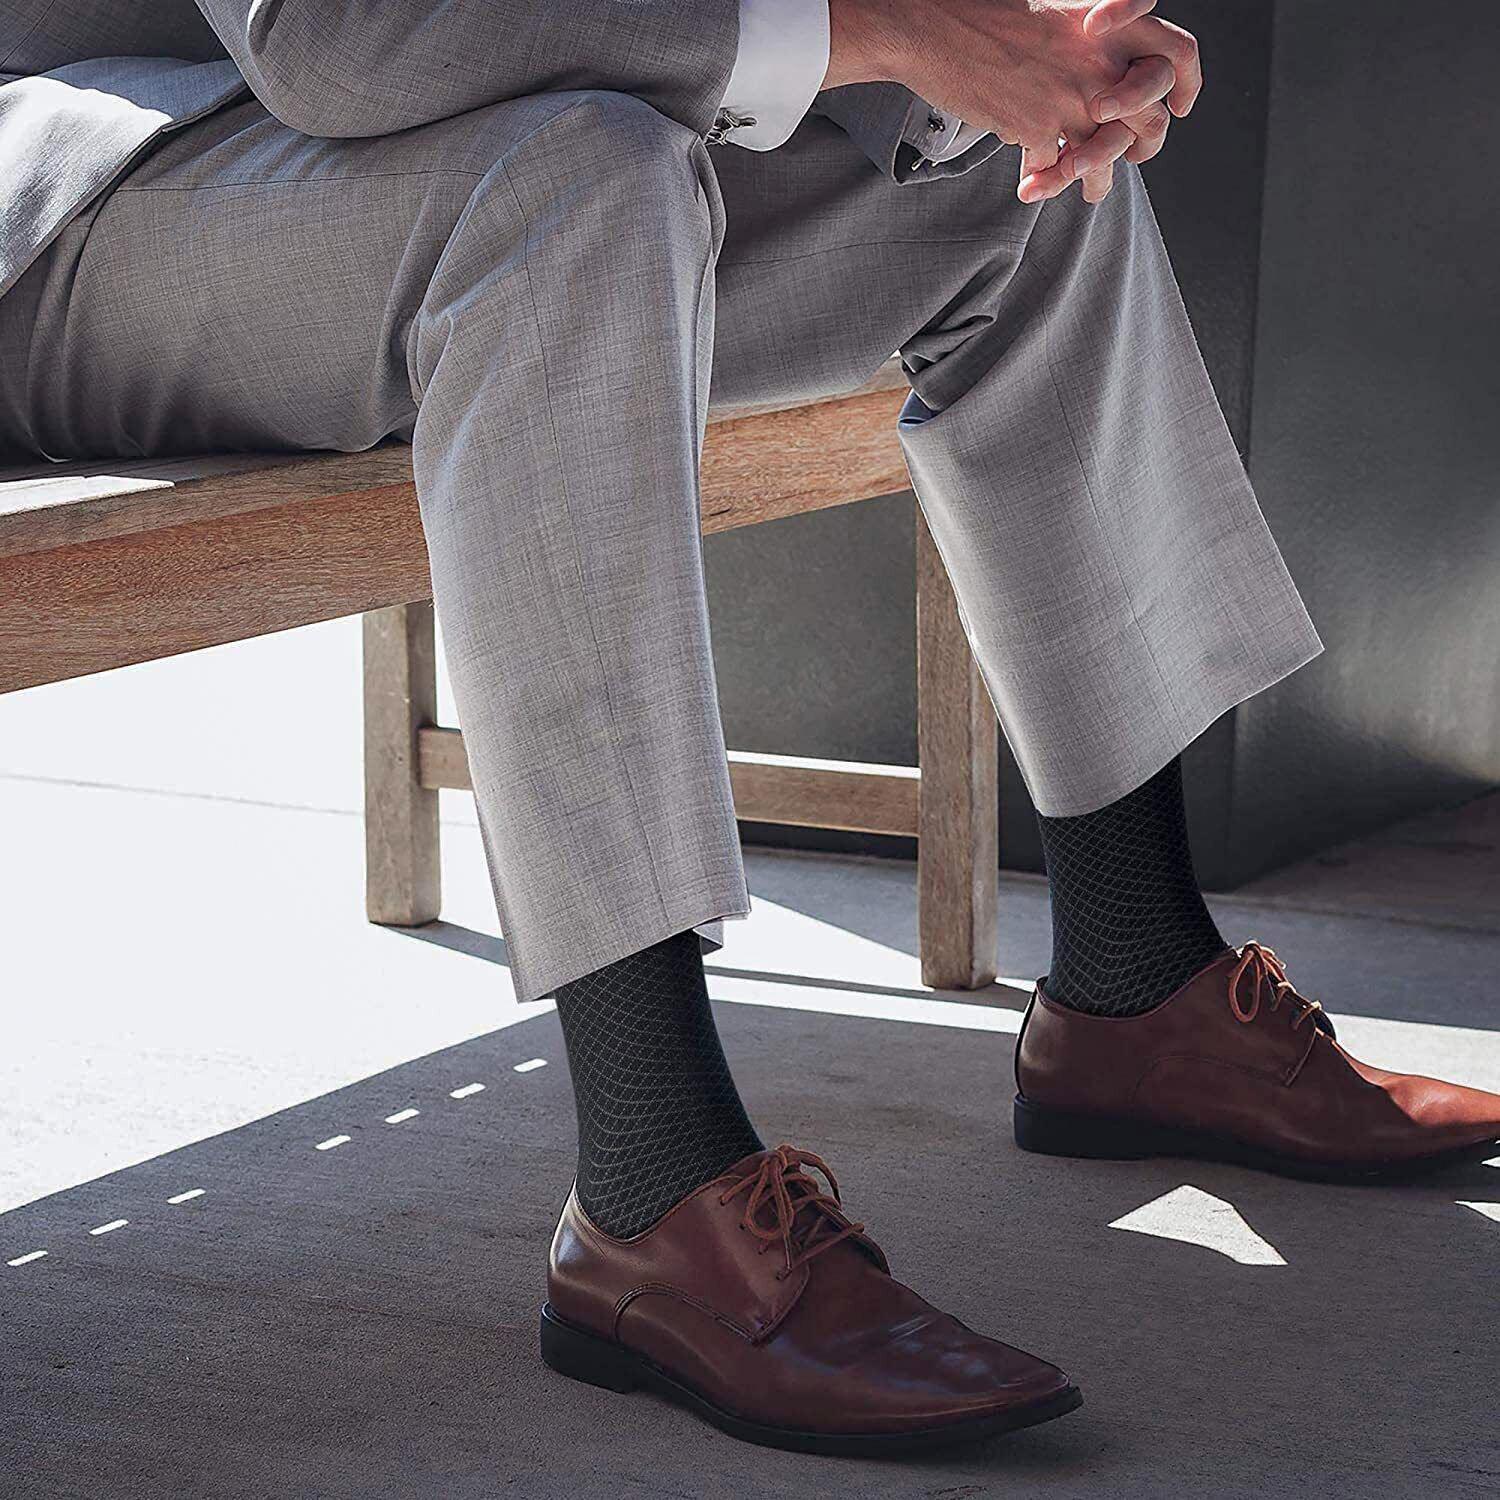 grey suit, black socks, and brown derby shoes